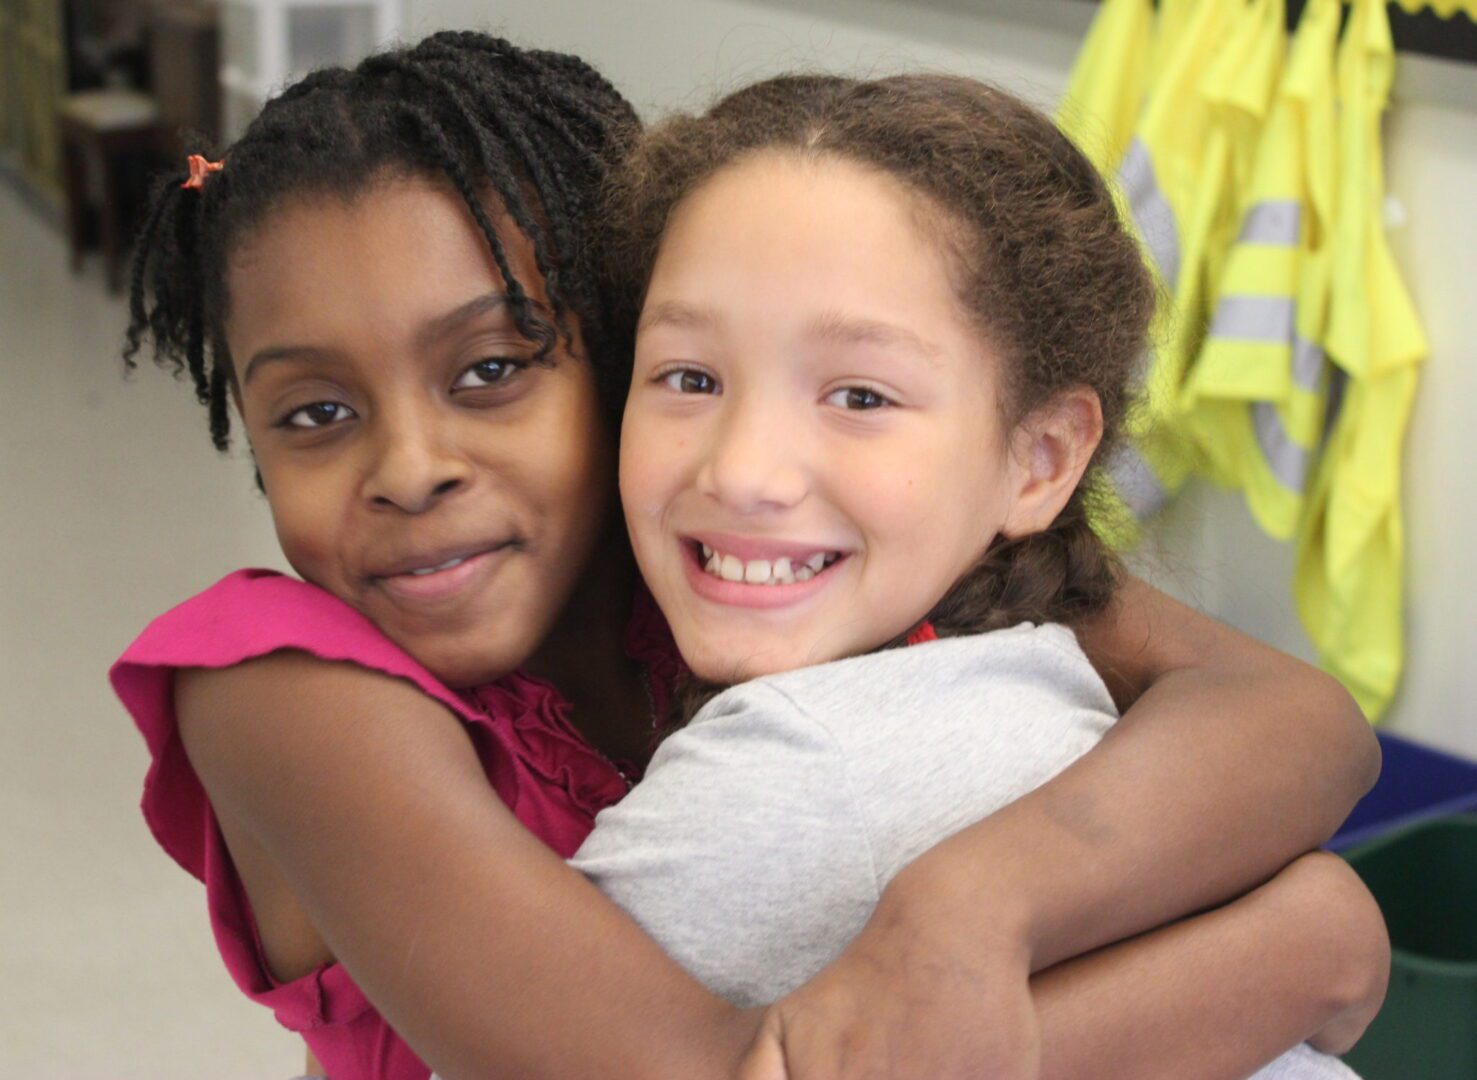 Two young girls hugging each other in a classroom.